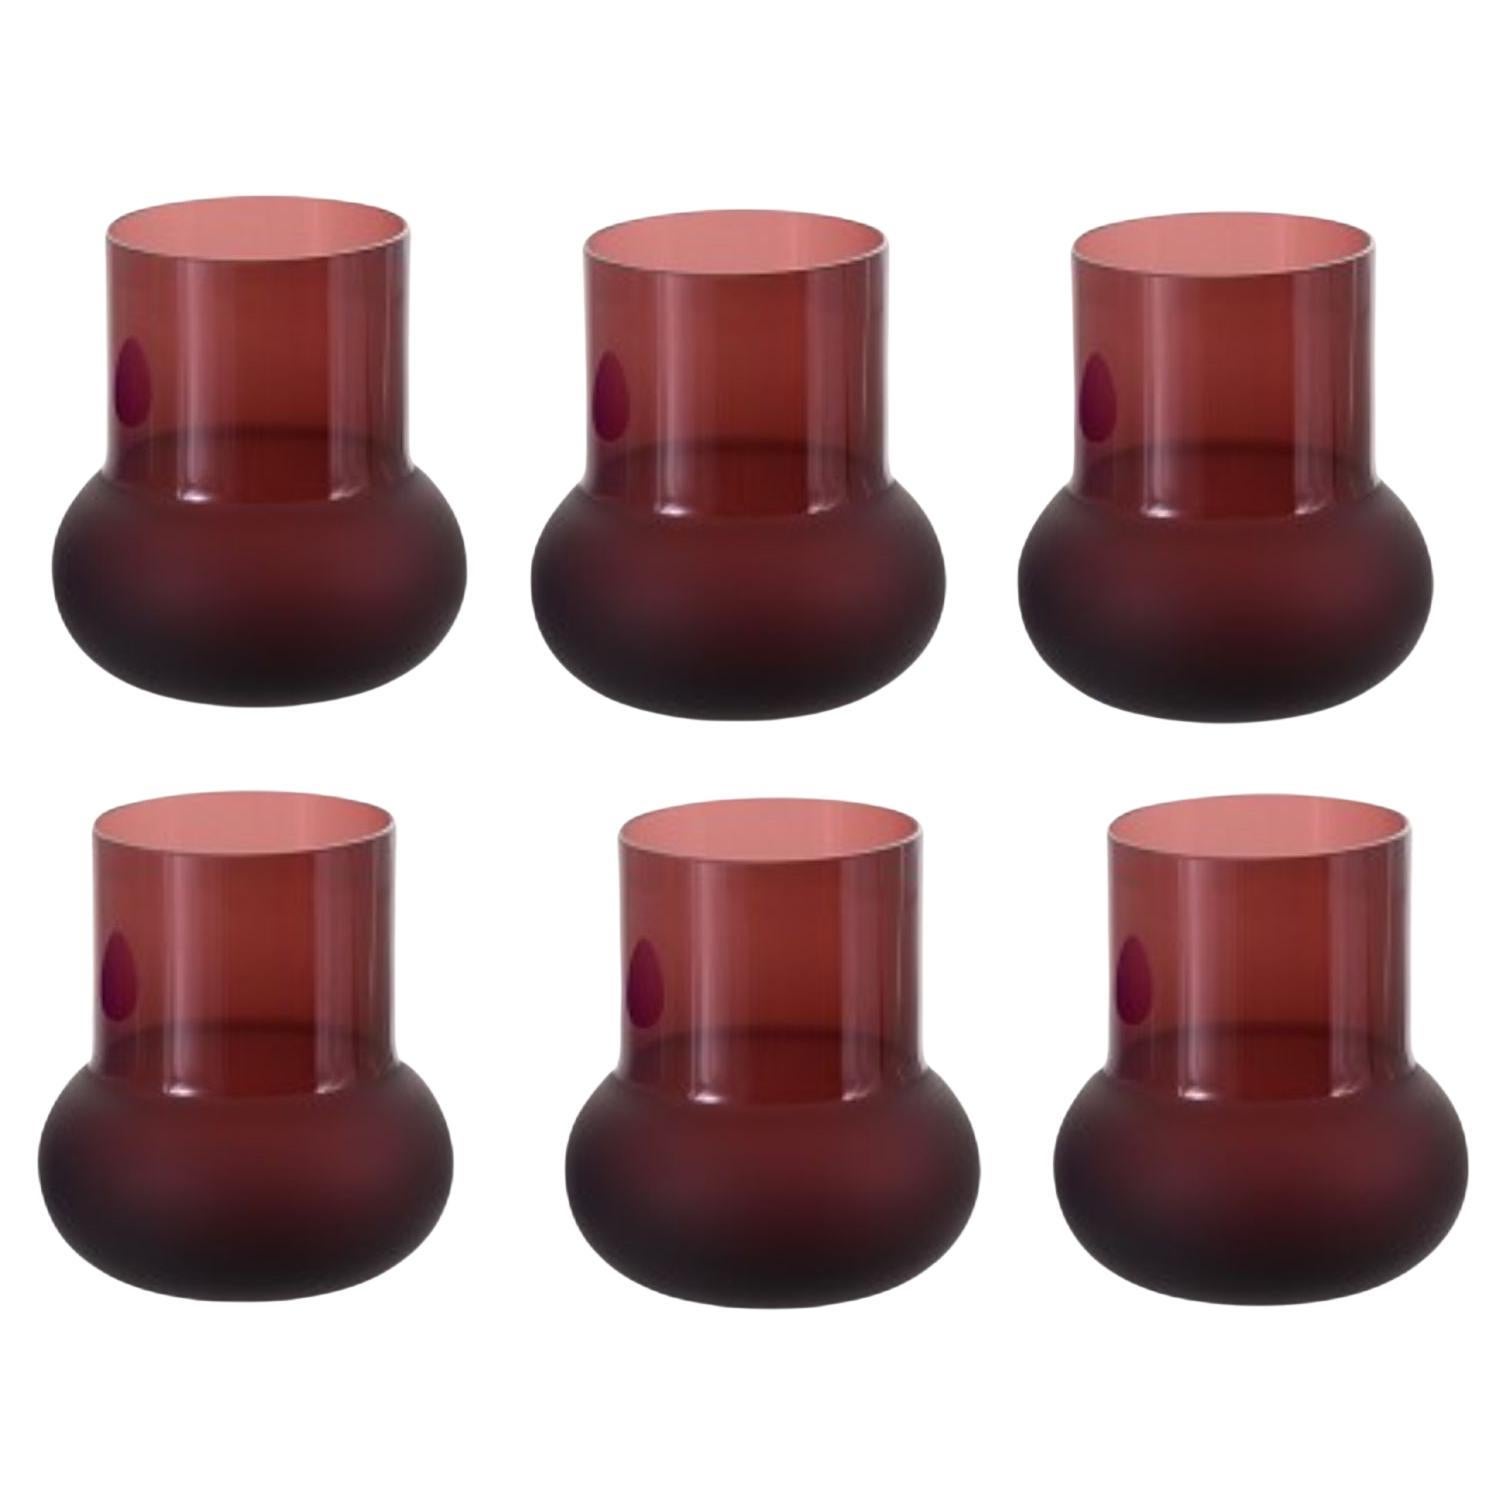 Set of 6 Burgundy Glasses by Pulpo